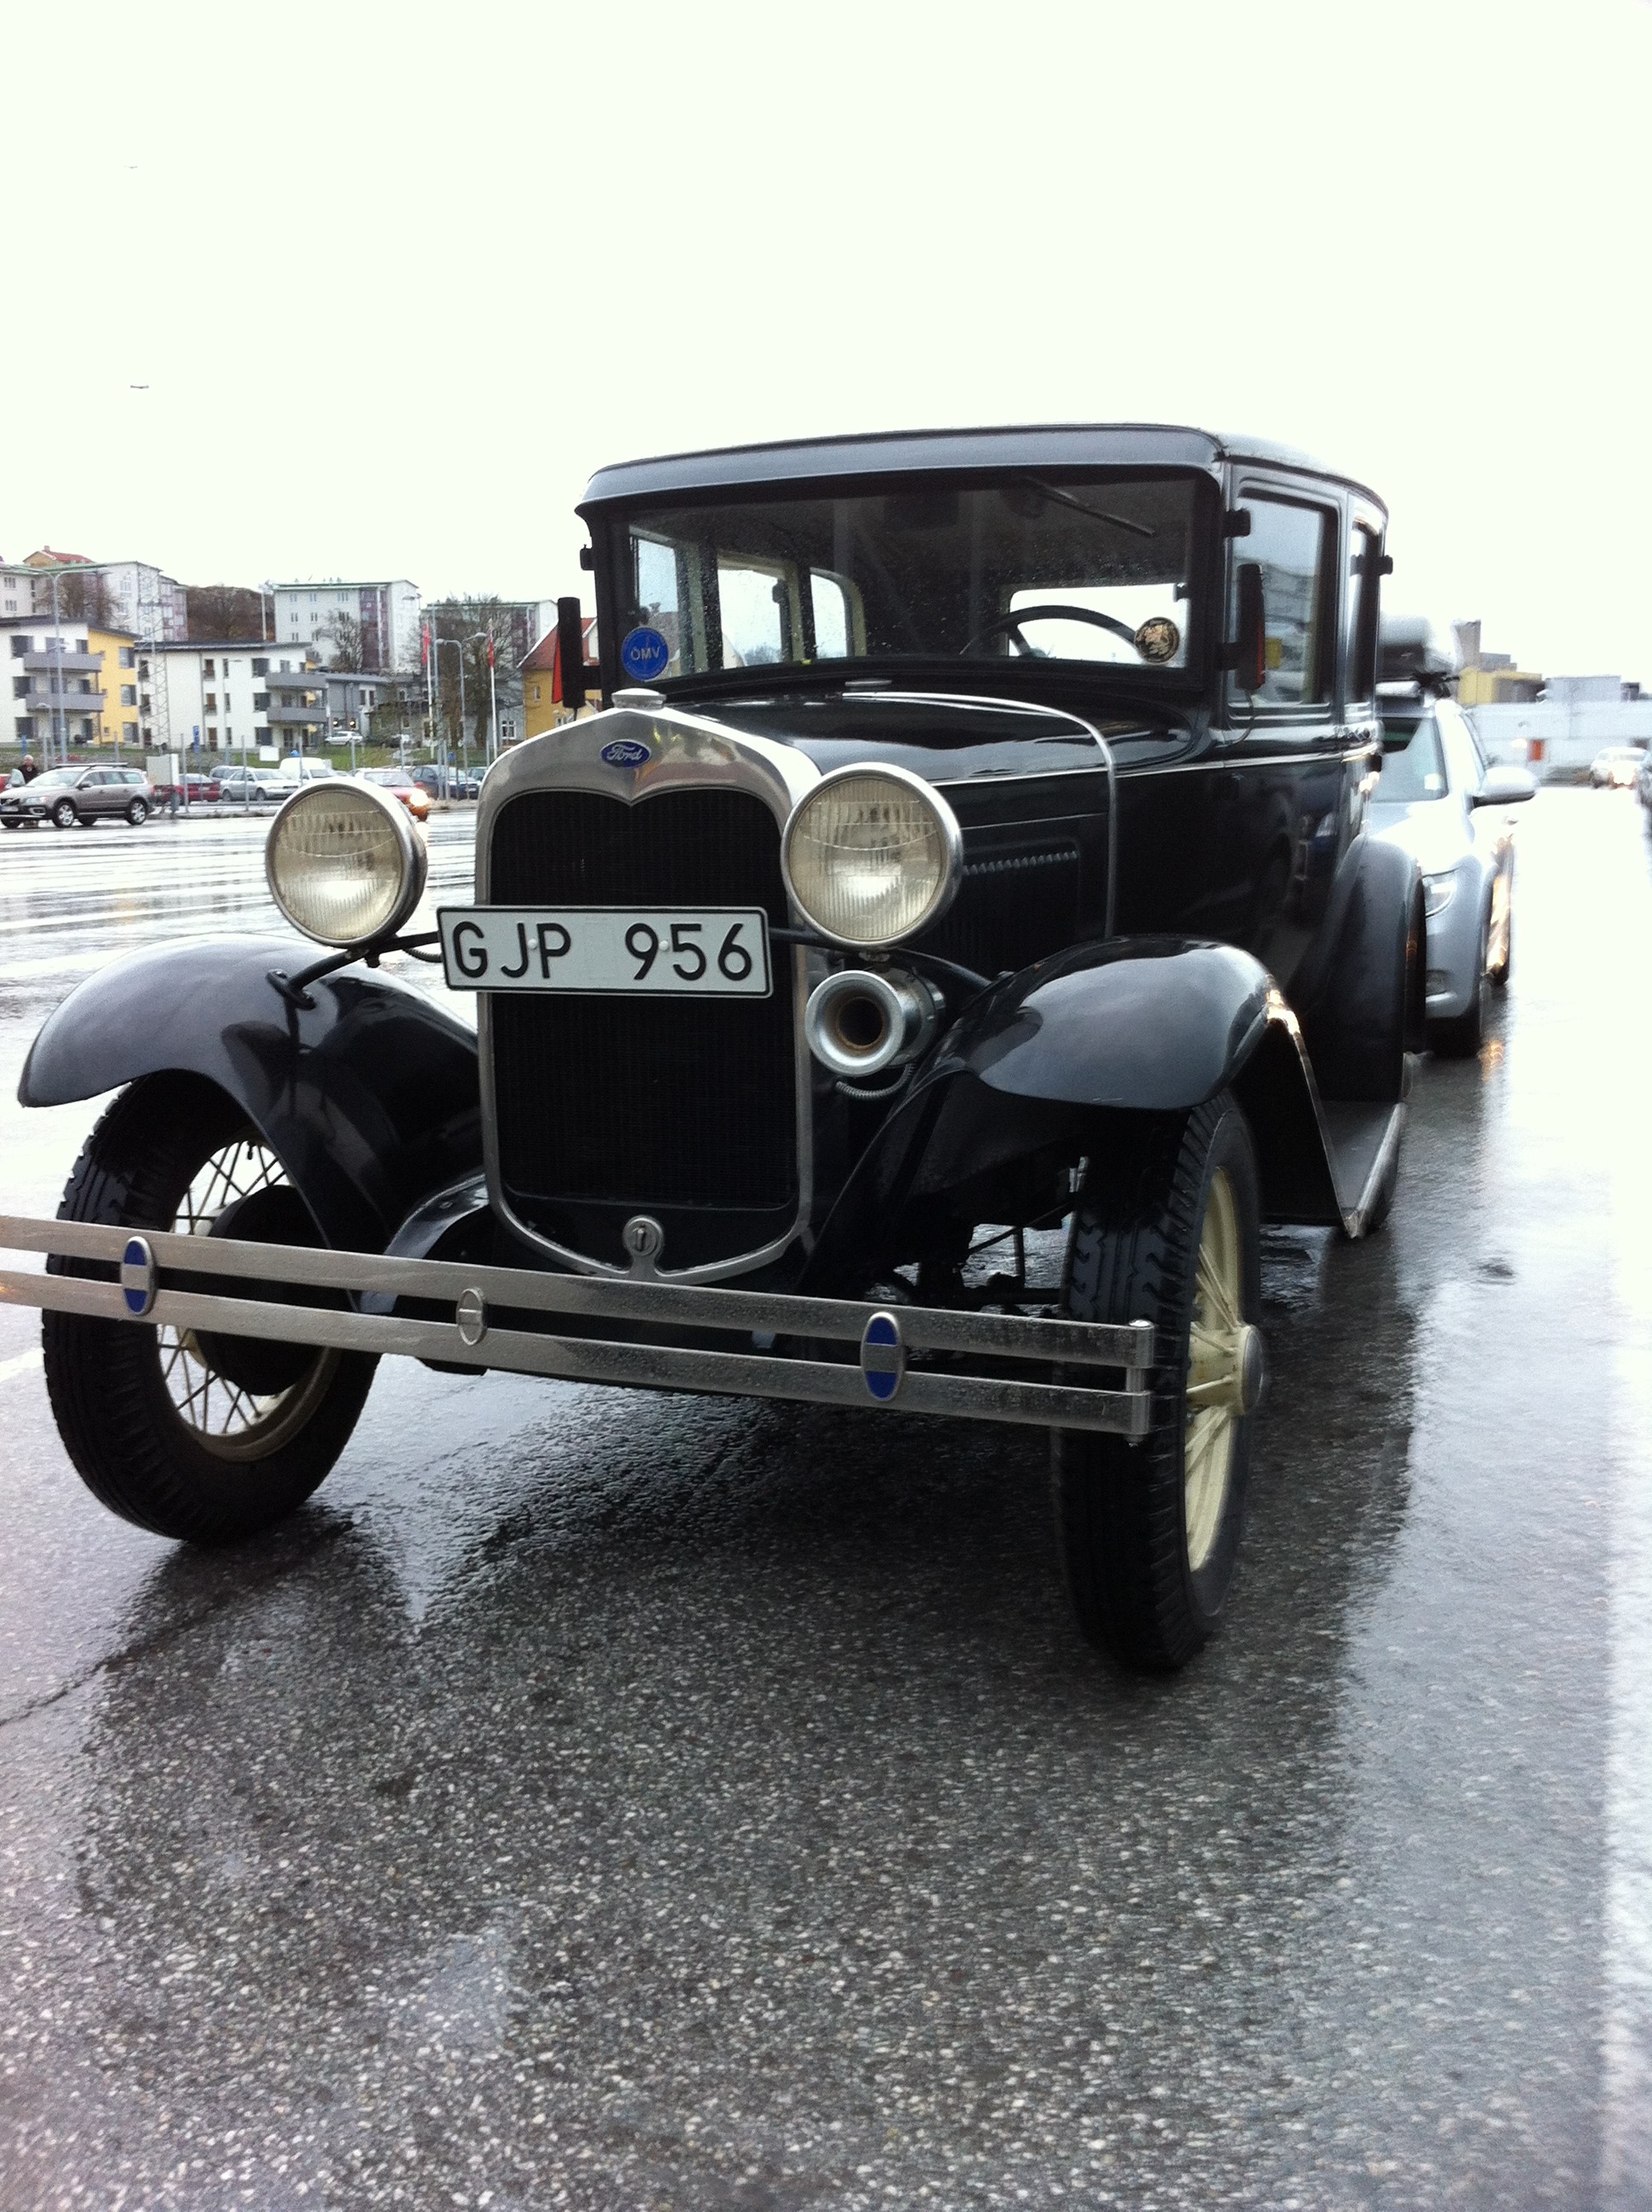 Ford Model A 4-door at the harbor of Visby Gotland